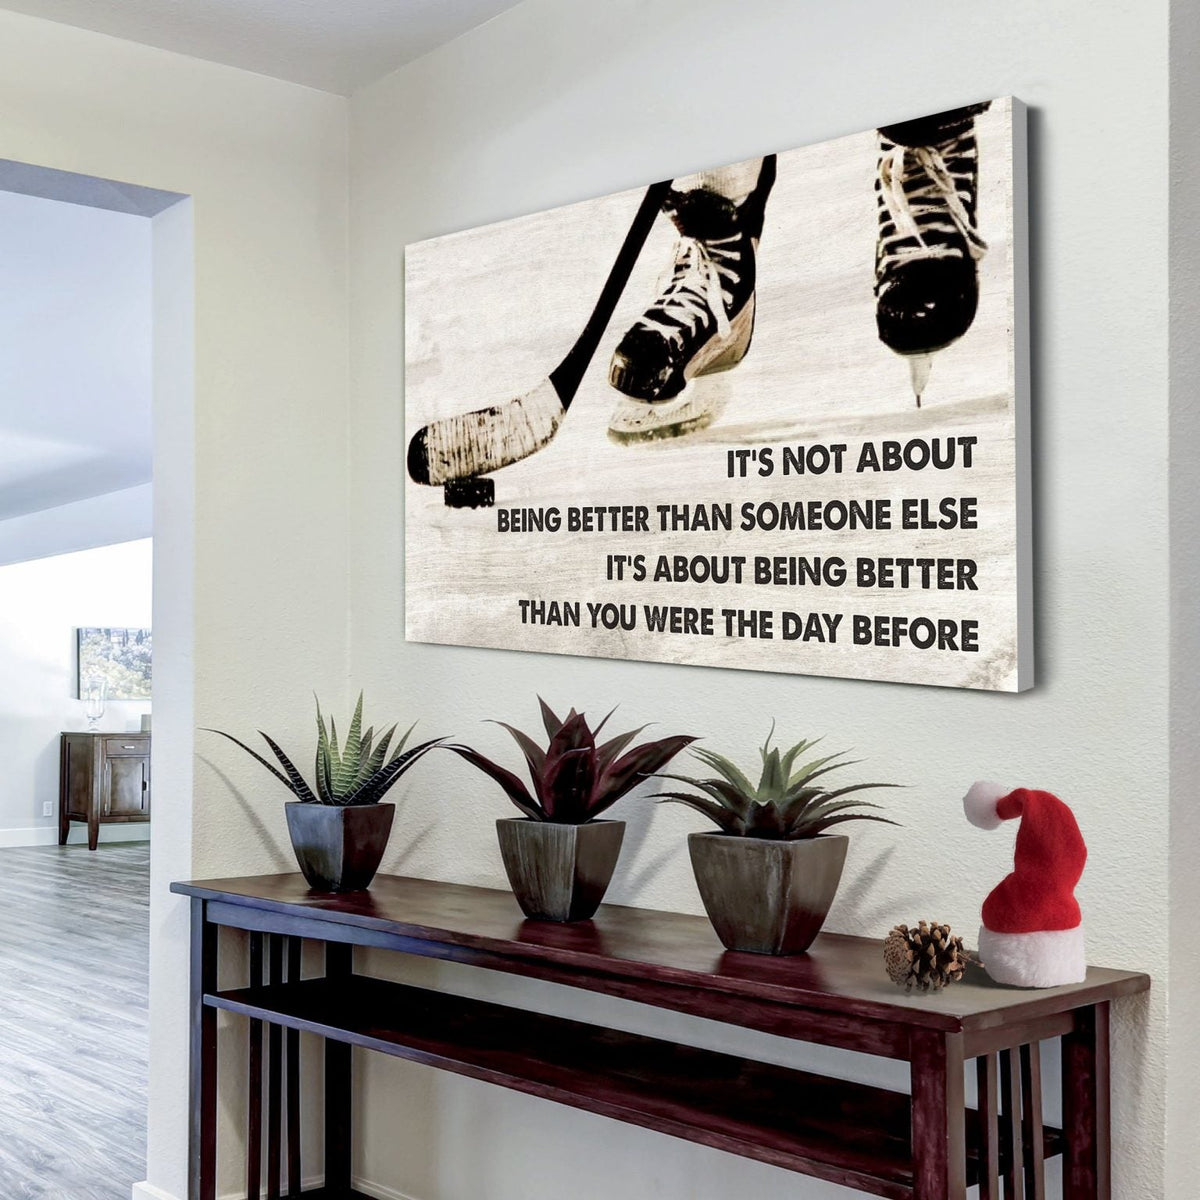 Tennis customizable poster canvas - It is not about better than someone else, It is about being better than you were the day before